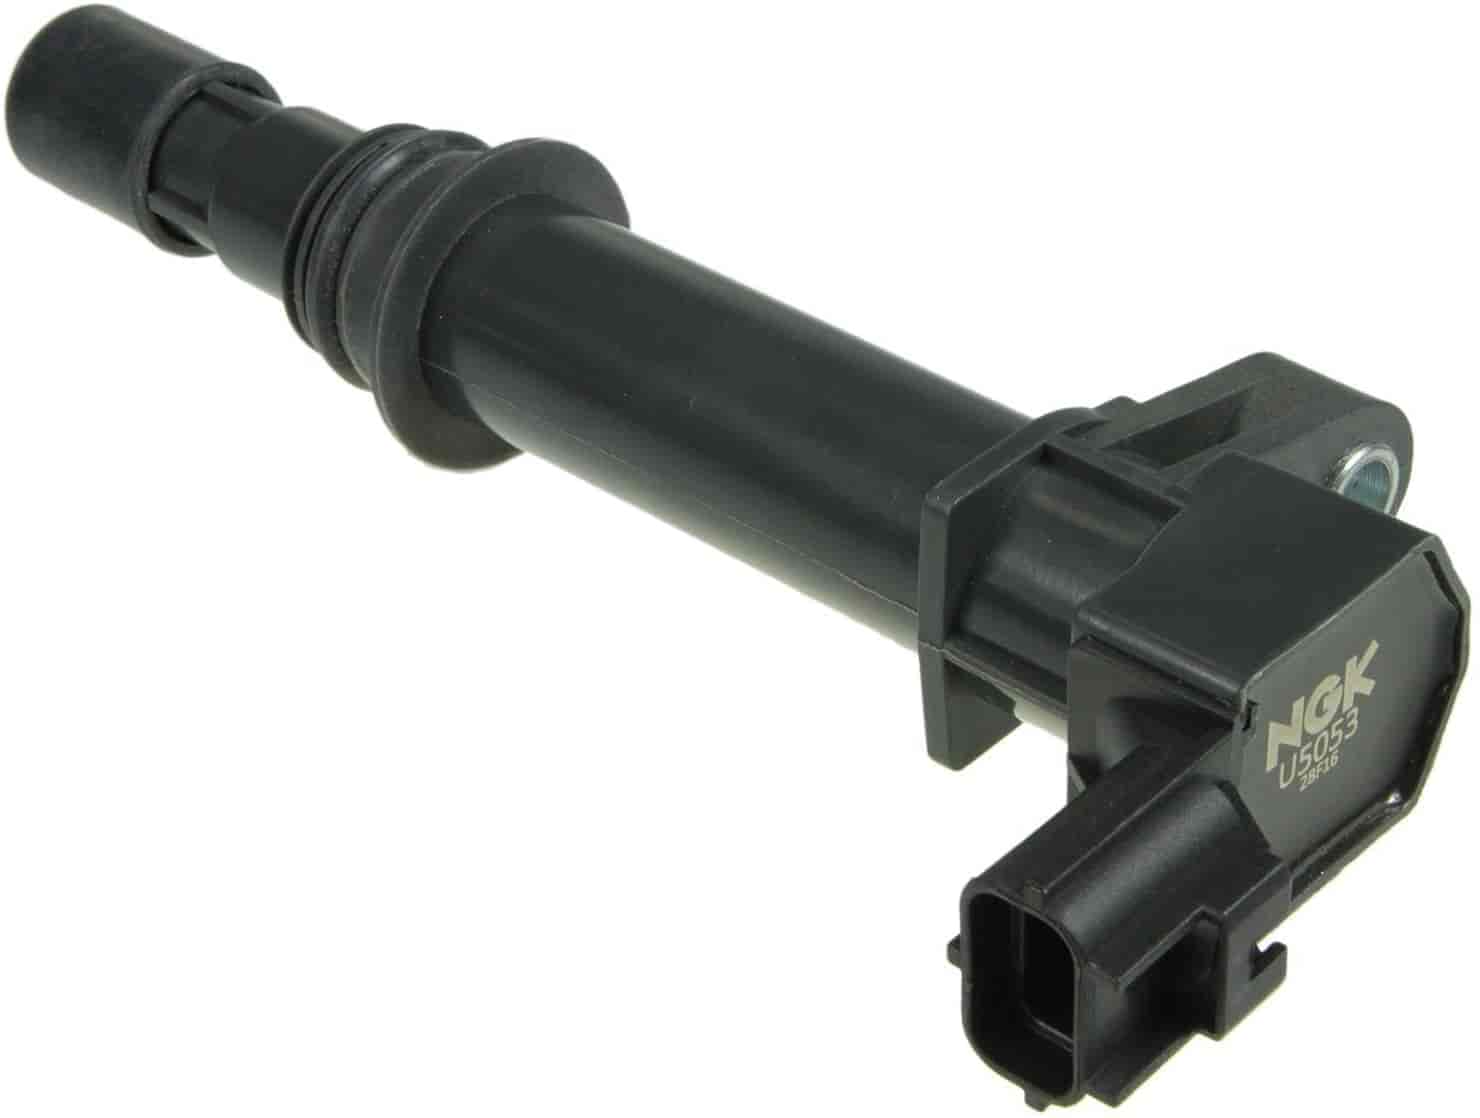 Coil-on-Plug Pencil-Type Ignition Coil Multi-Pack 1999-2008 Chrysler/Dodge/Jeep/Mitsubishi